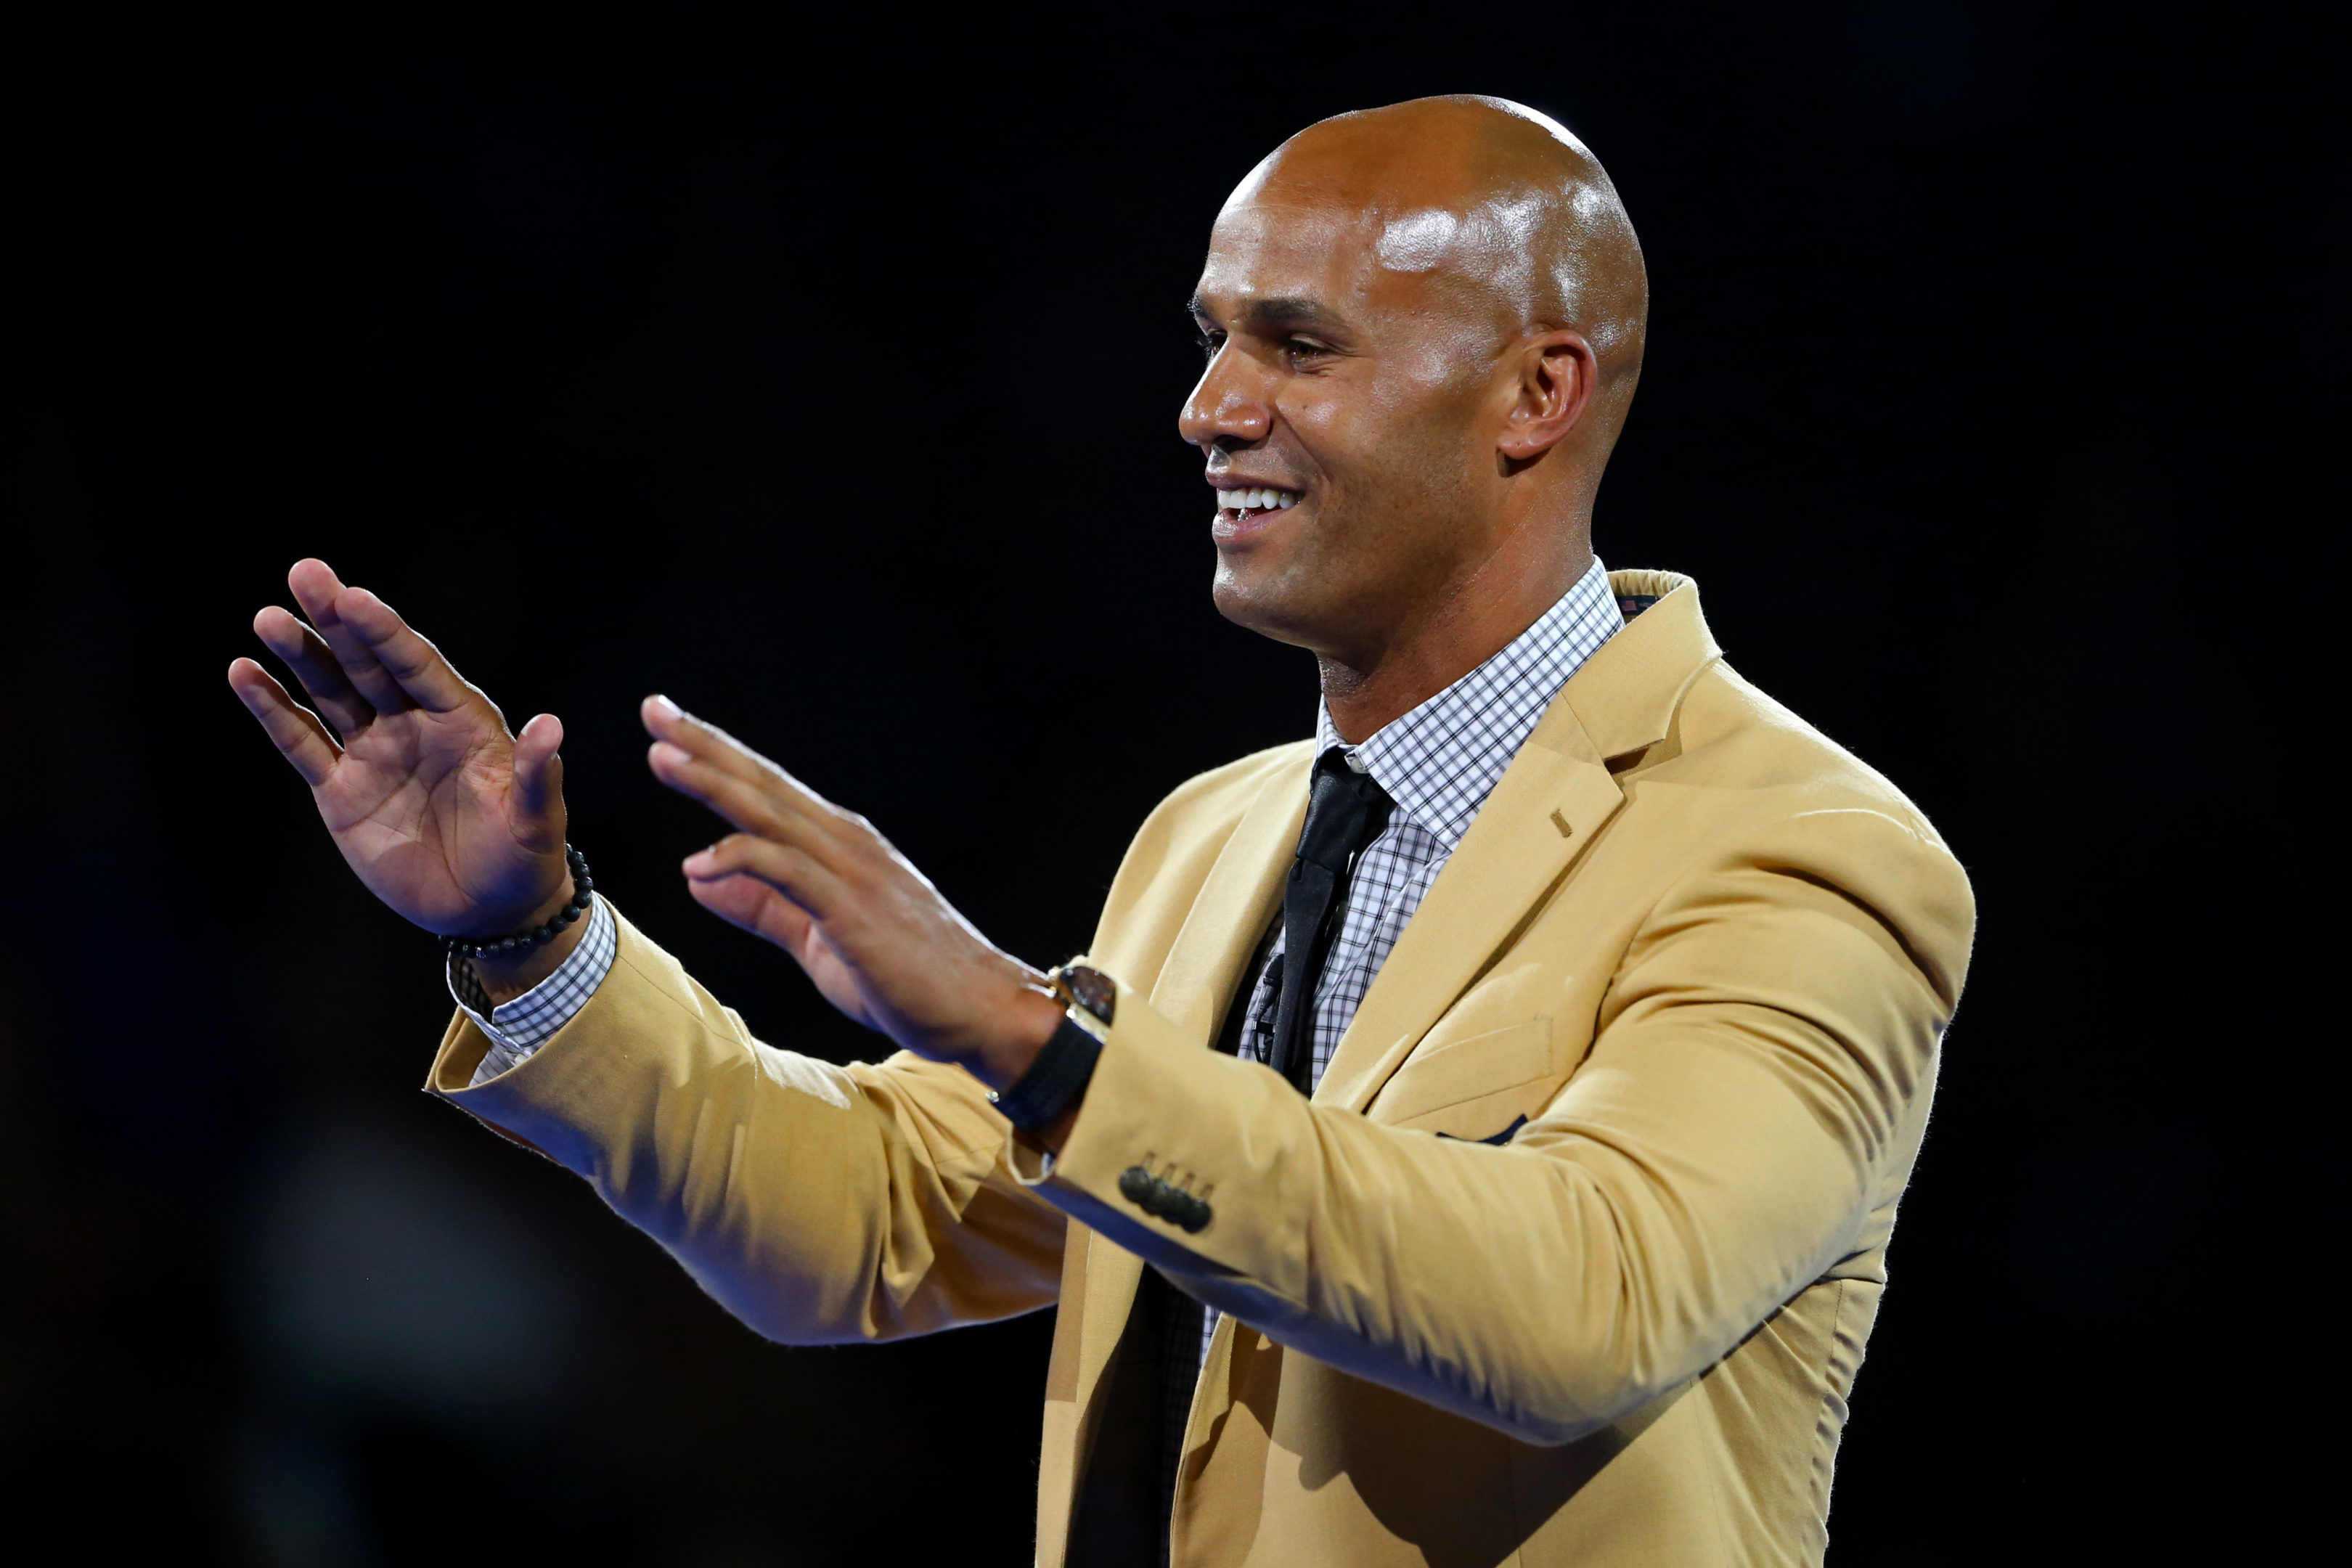 Jason Taylor could join Miami football staff as analyst or consultant